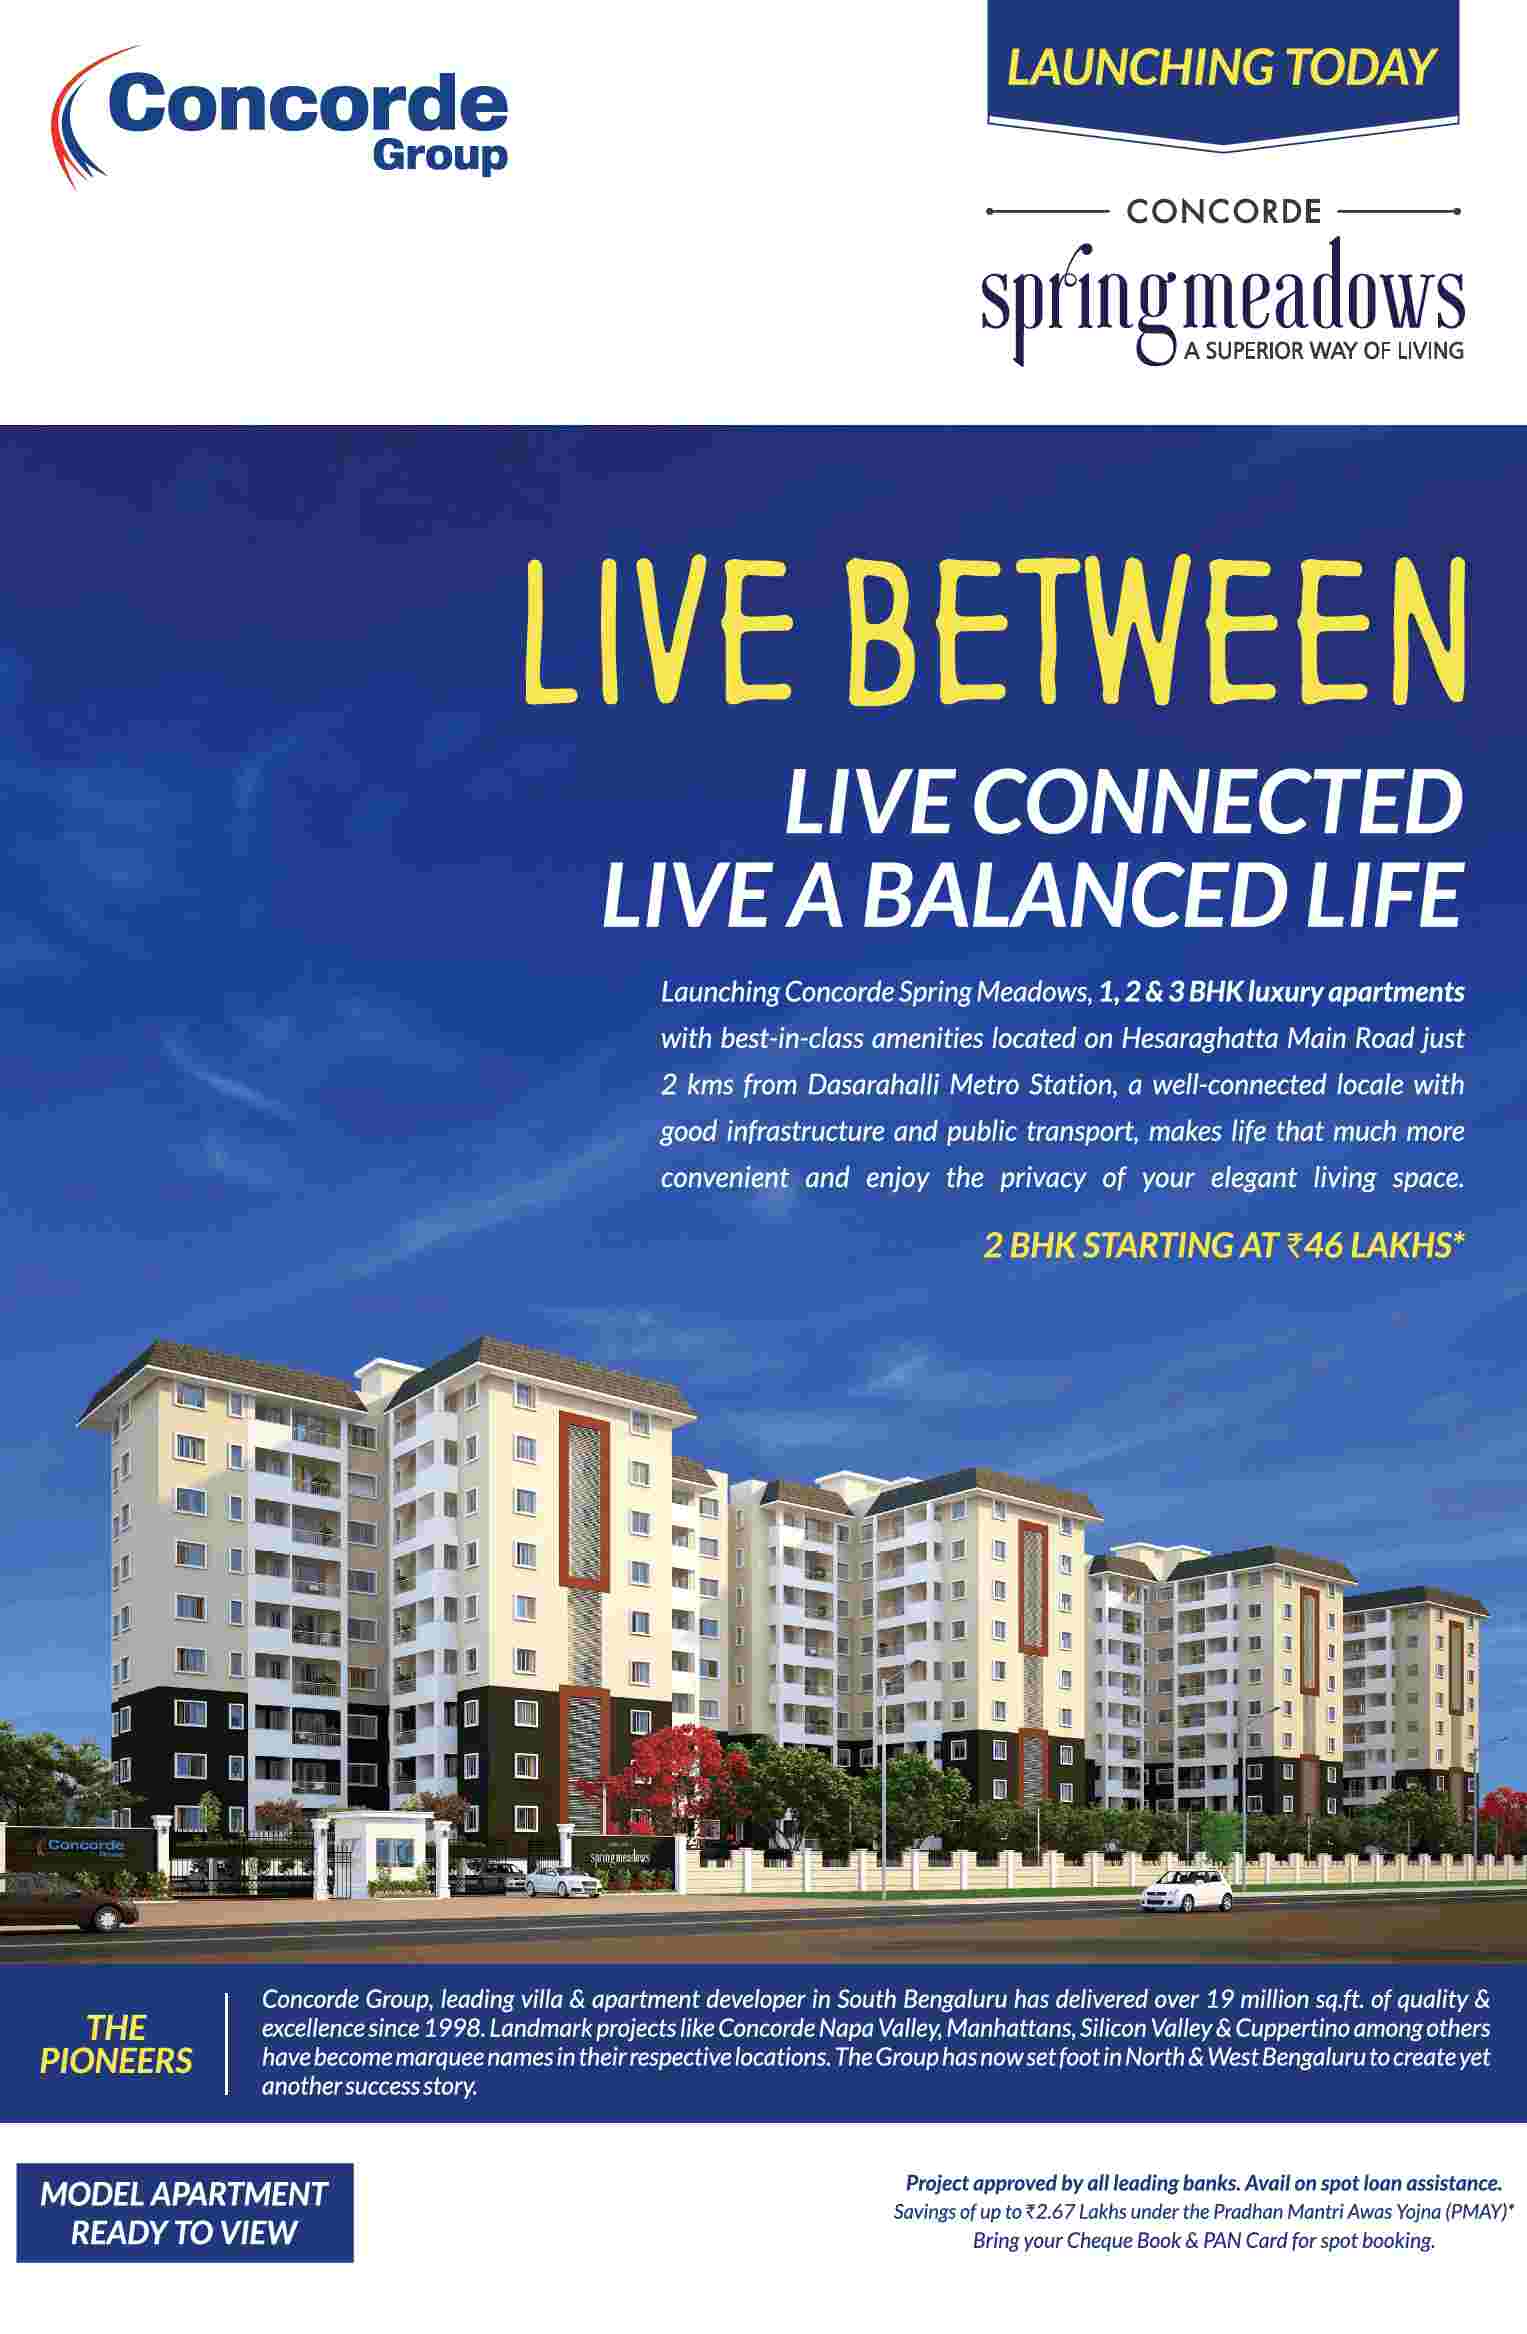 Model apartment ready to view at Concorde Spring Meadows in Bangalore Update